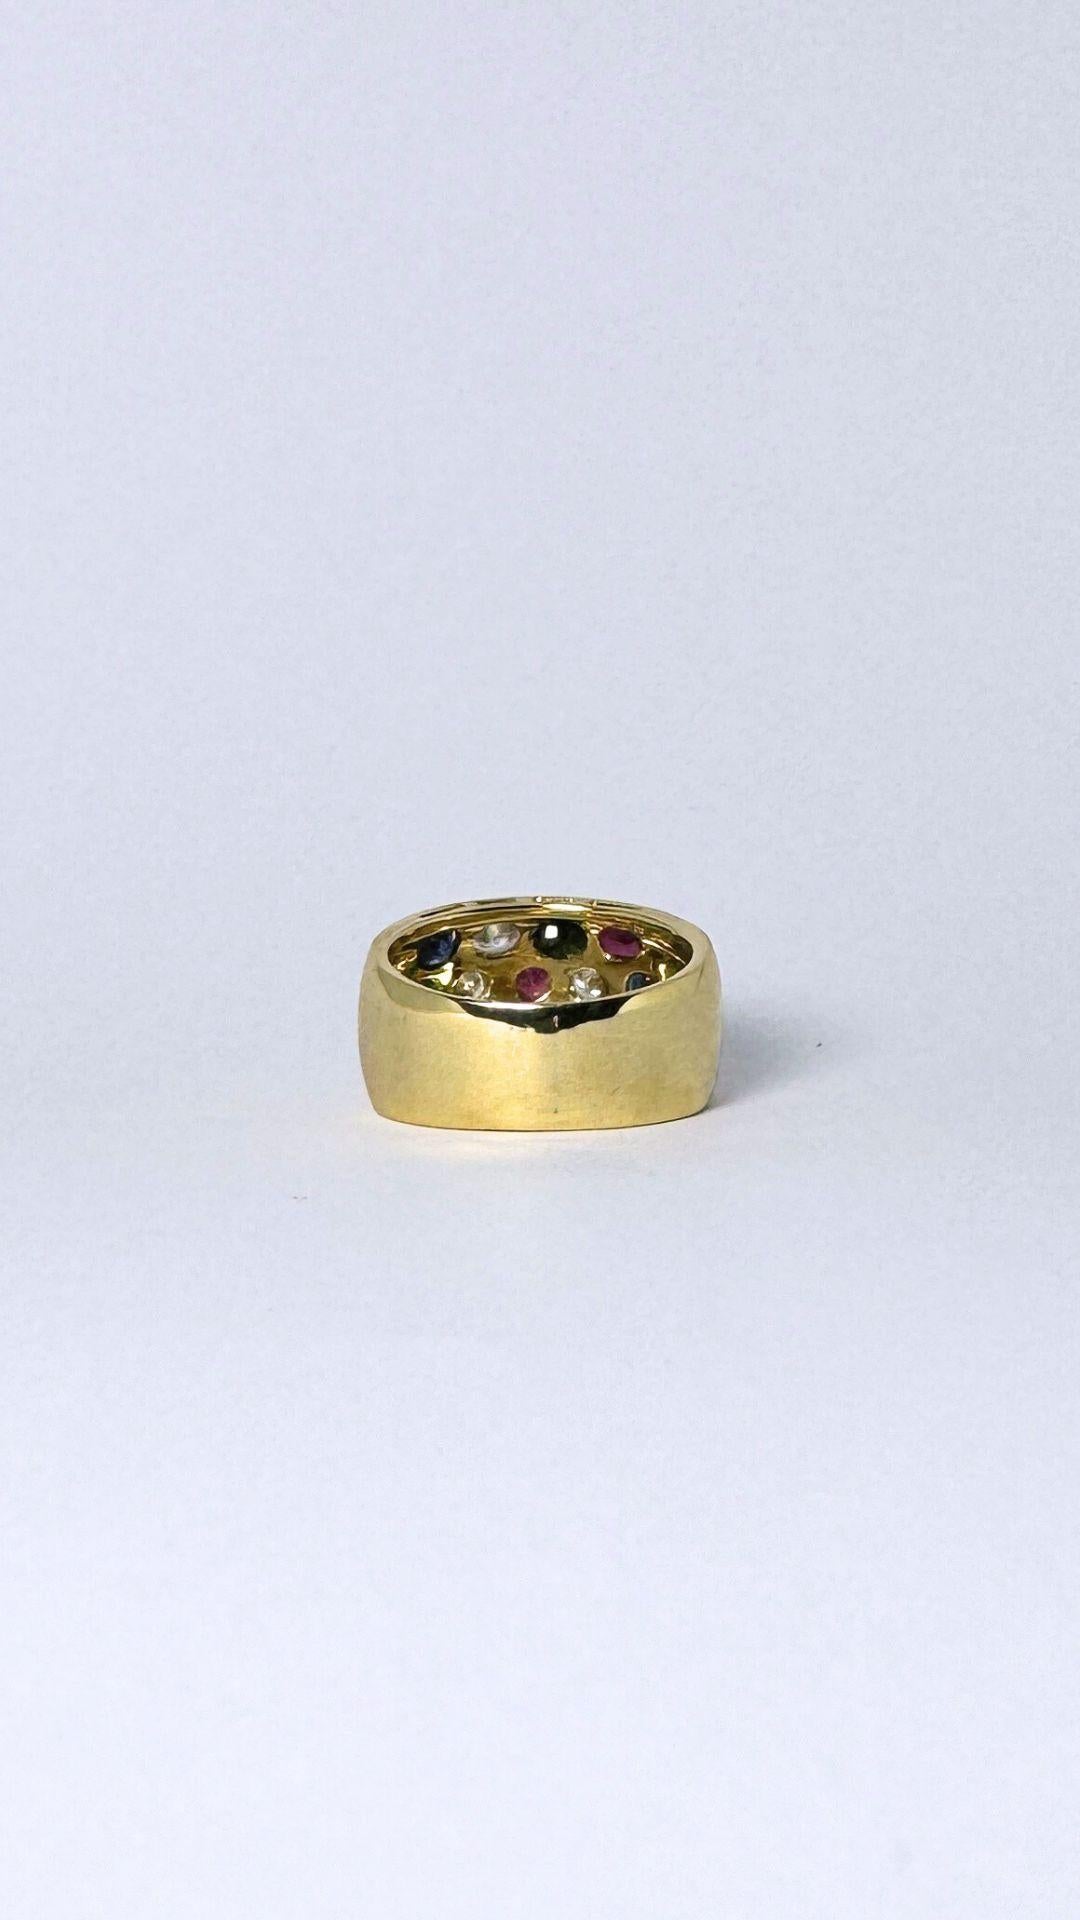 Cocktail ring made of 18 carat gold with diamonds, rubies, smaragd, sapphire In Good Condition For Sale In Heemstede, NL